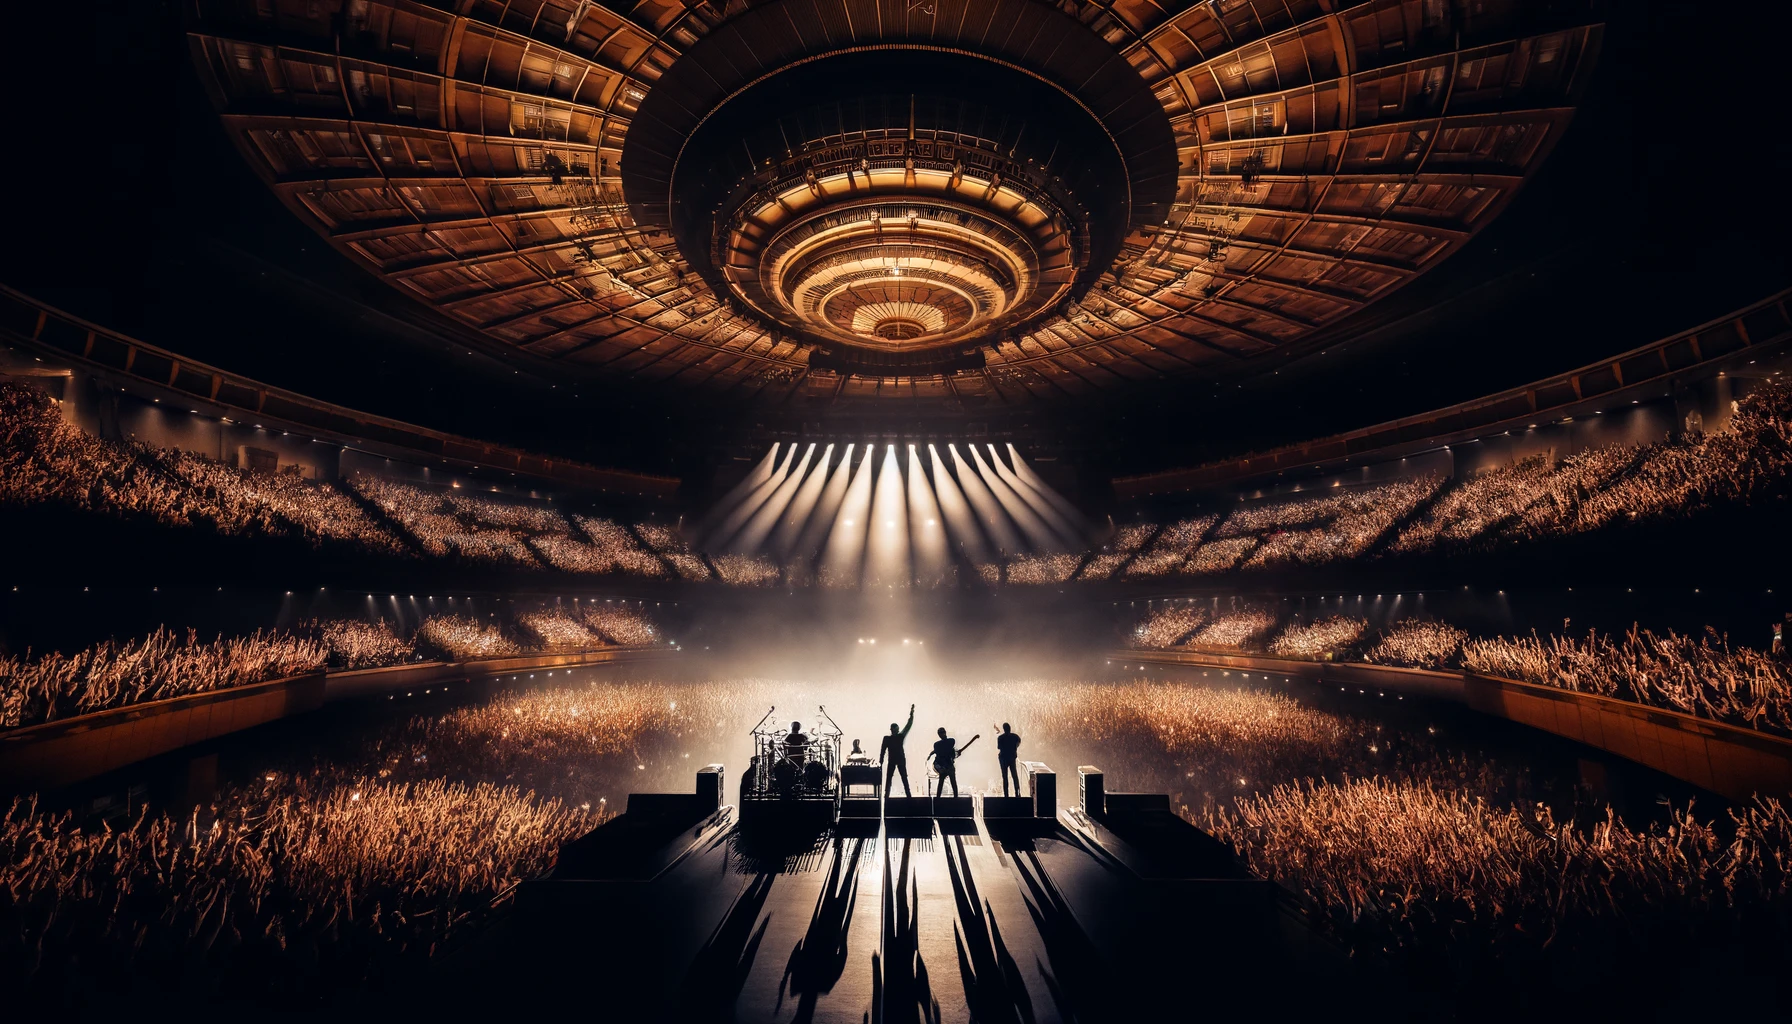 An inspiring image of a live concert at the Budokan arena in Tokyo, Japan, emphasizing the grandeur and prestige of the venue. The perspective is from the back of the stage, looking out over a massive crowd that fills the iconic circular arena. The band on stage is seen in silhouette, with their arms raised in victory, creating a powerful and iconic moment. The audience, lit by a sea of light sticks, is cheering wildly, underscoring the significance of performing at such a renowned venue. The stage lighting casts dramatic shadows and highlights the architectural details of the Budokan, depicted in a wide 16:9 format.